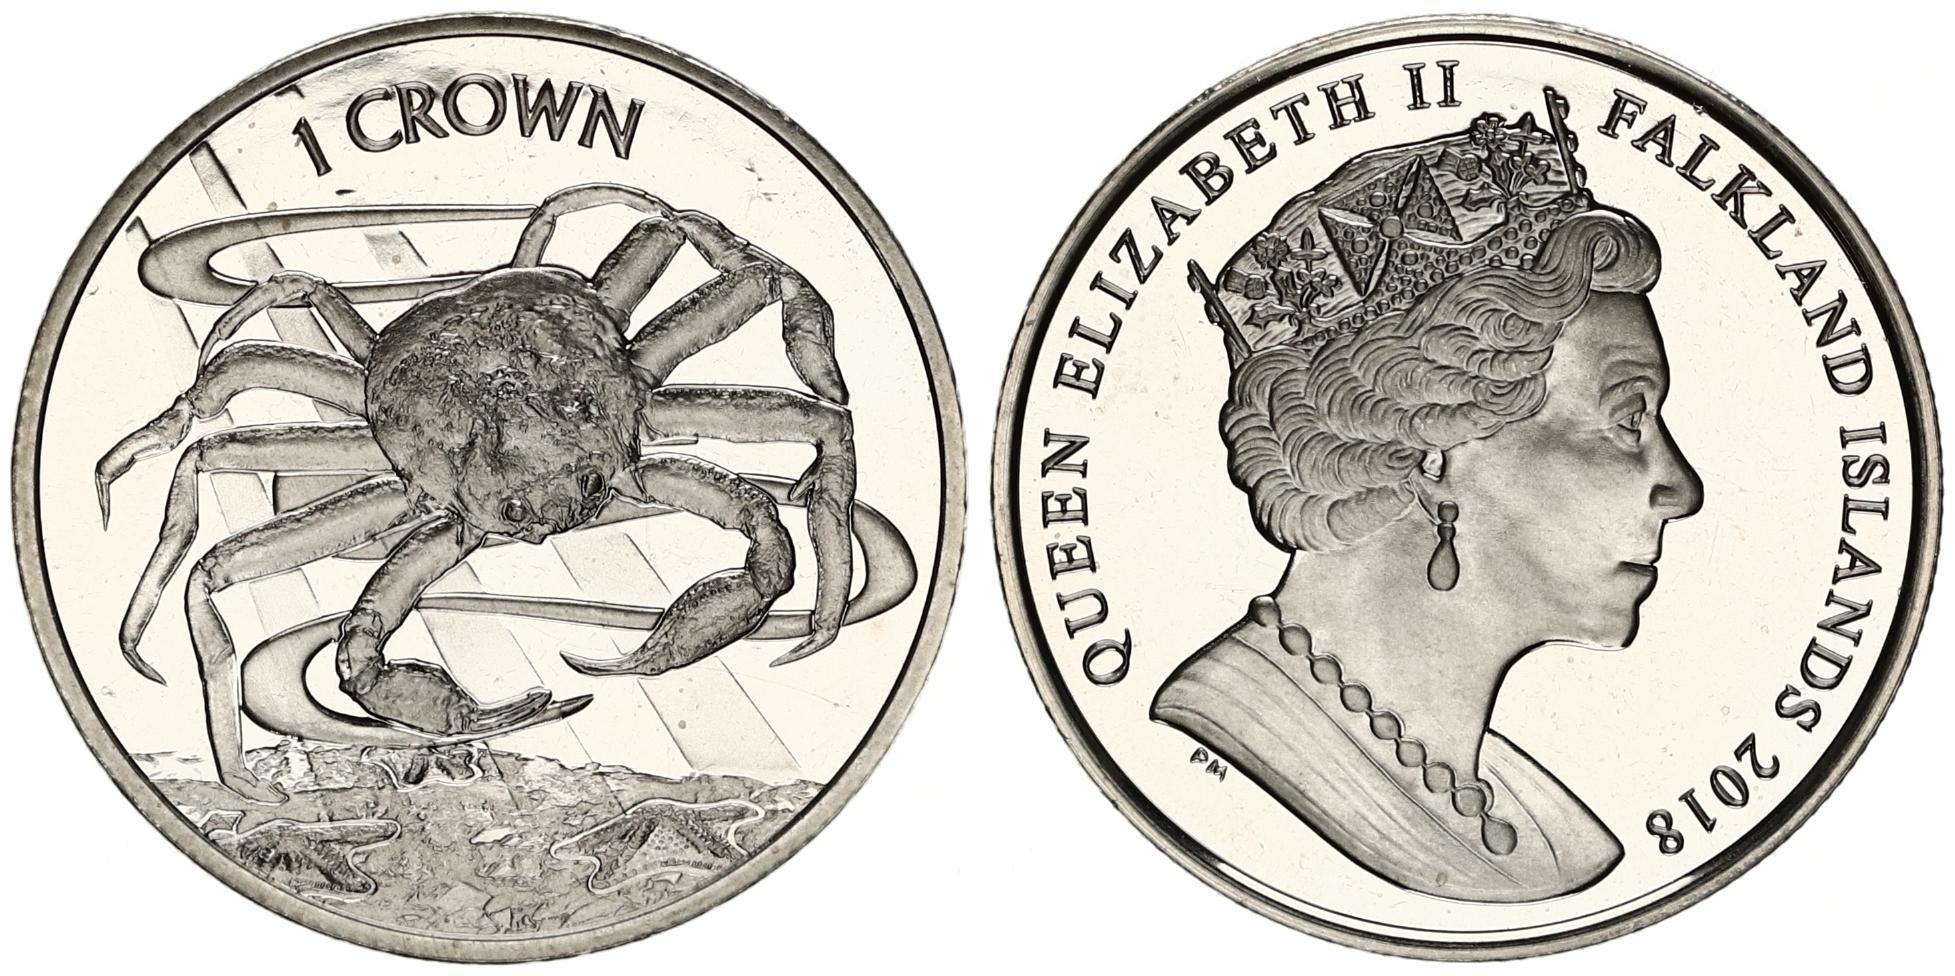 RARE NEW ISSUE 1 CROWN UNC COIN 2018 YEAR SEA CRAB FALKLAND ISLANDS 